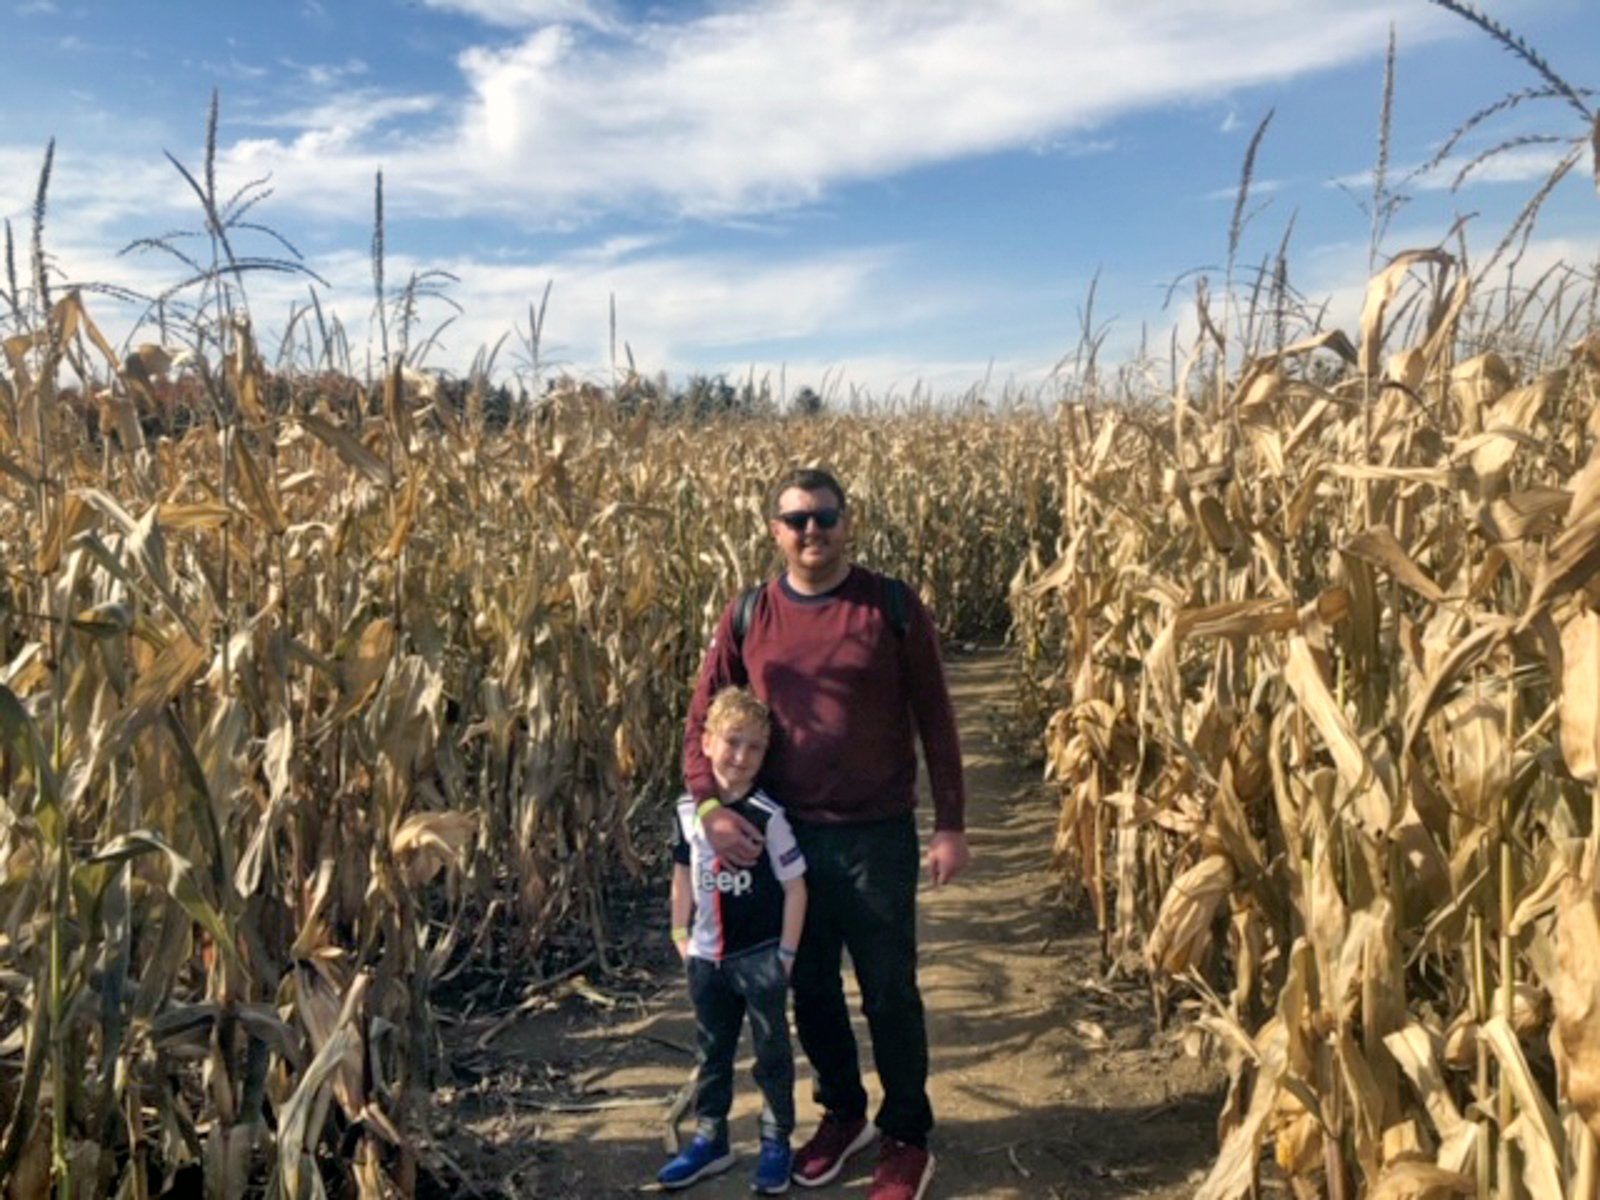 Barry and Lochlainn exploring the hay maze in the pumpkin farm, October 2019.